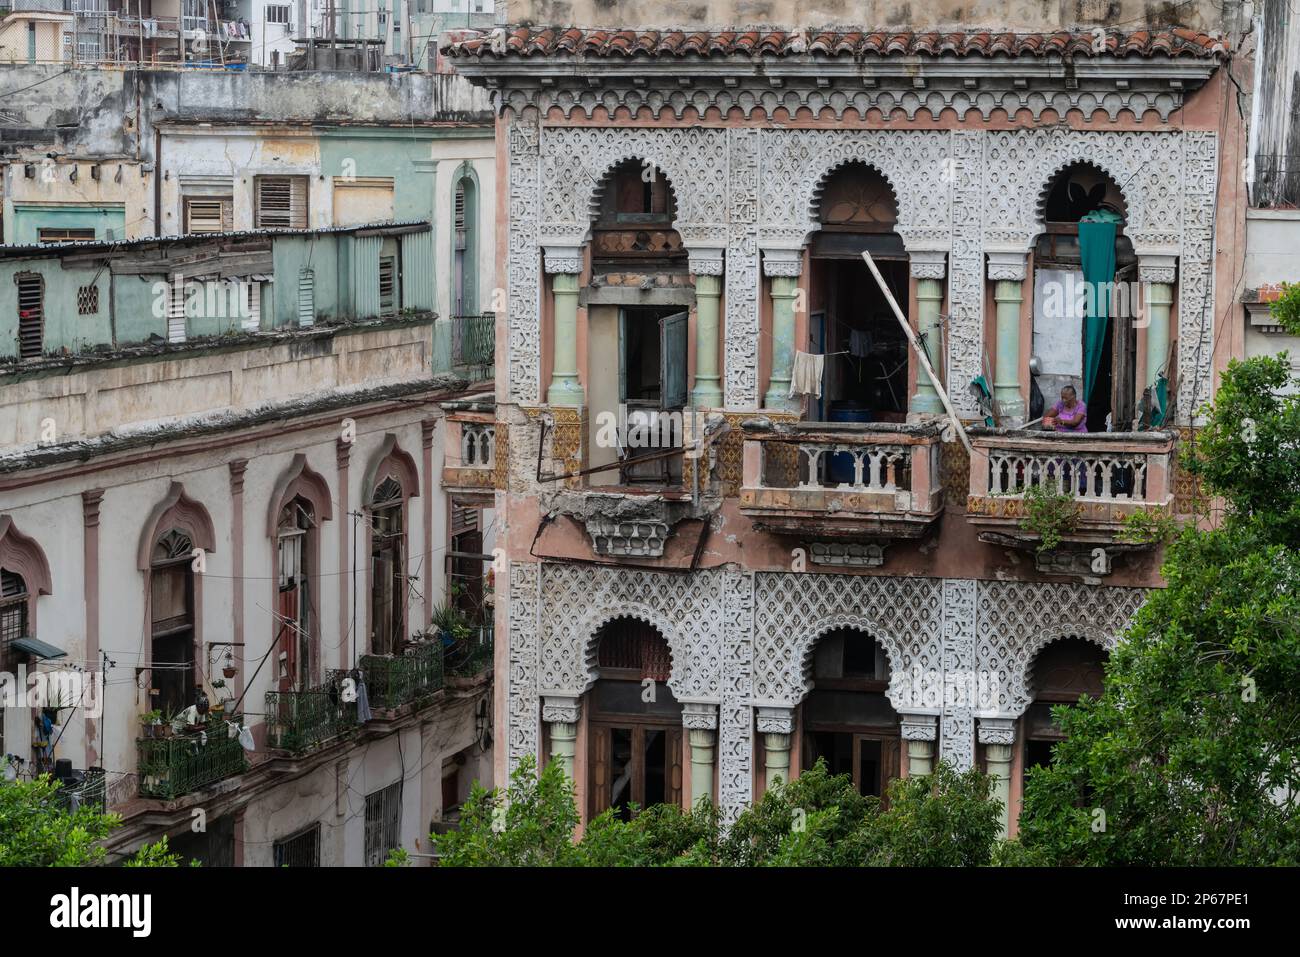 Cubans at their windows, Moorish architecture, in Old Havana, Cuba, West Indies, Caribbean, Central America Stock Photo